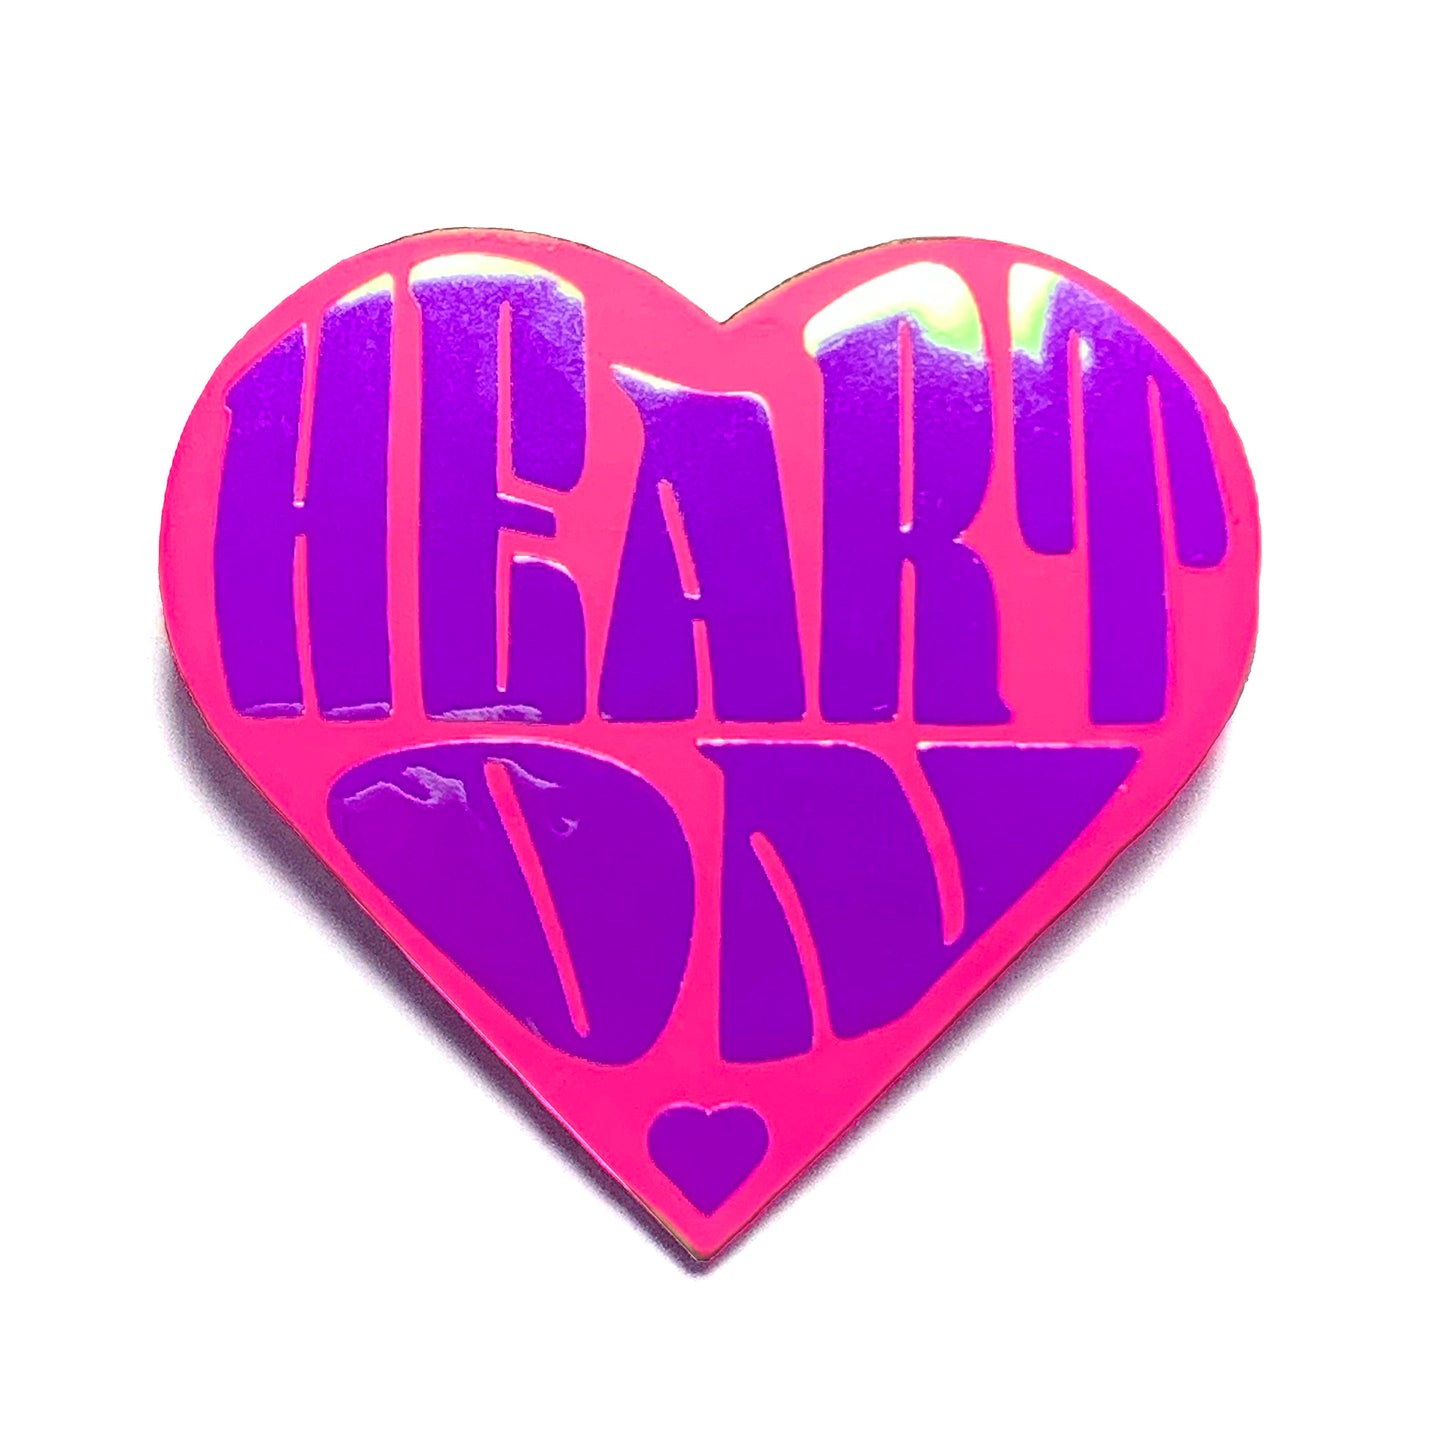 "Heart On" heart-shaped wood and vinyl pin - colour-shifting holographic pearl on neon pink matte